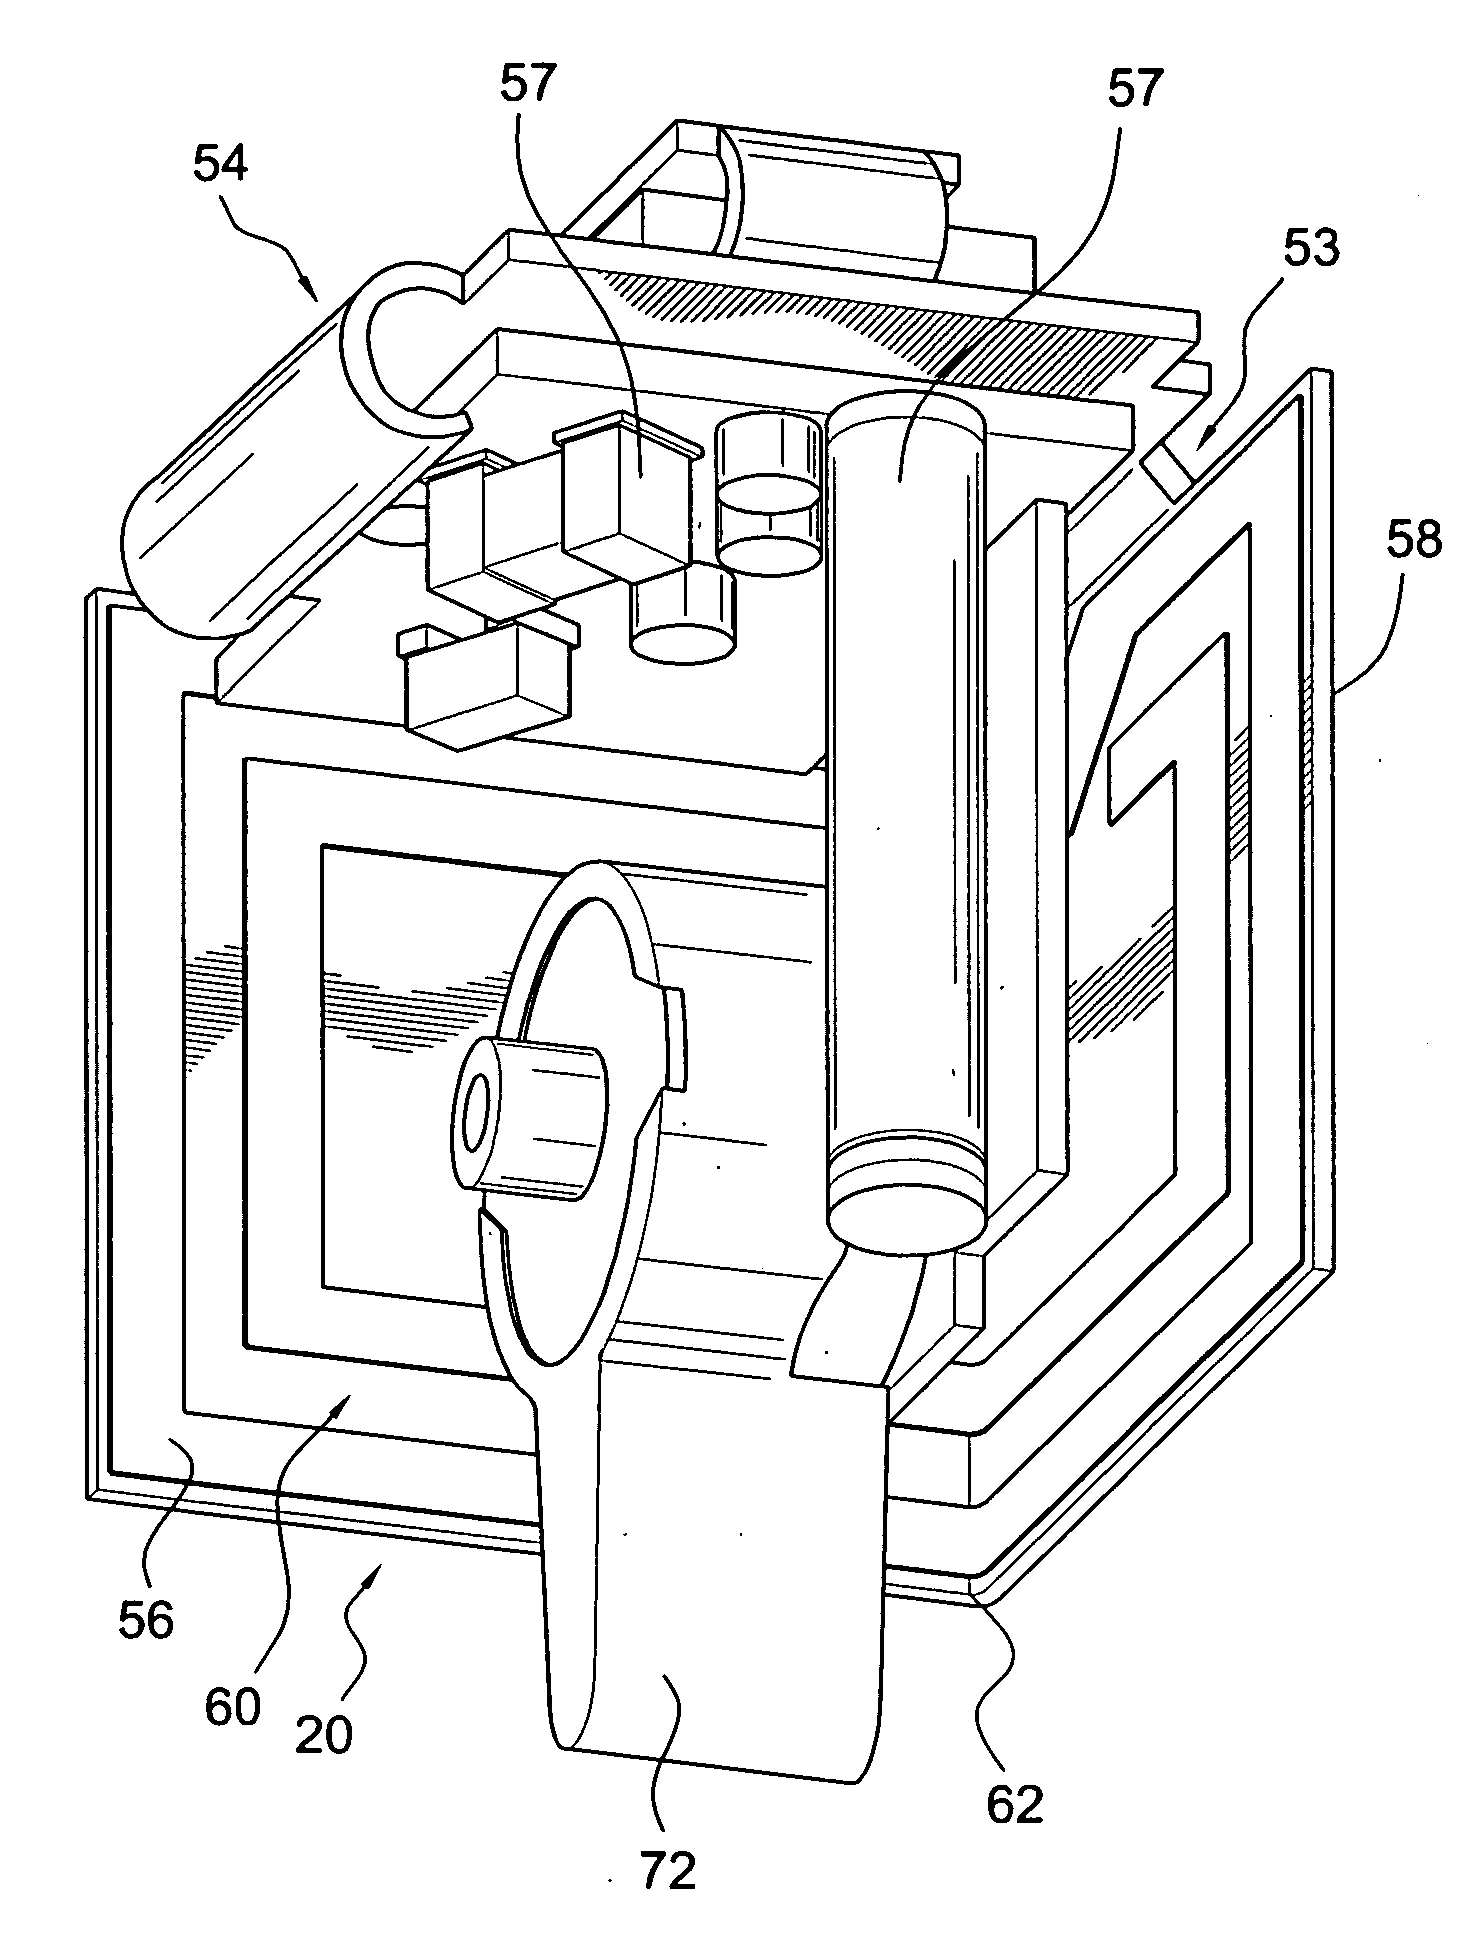 Wireless audio signal receiver device for a hearing instrument